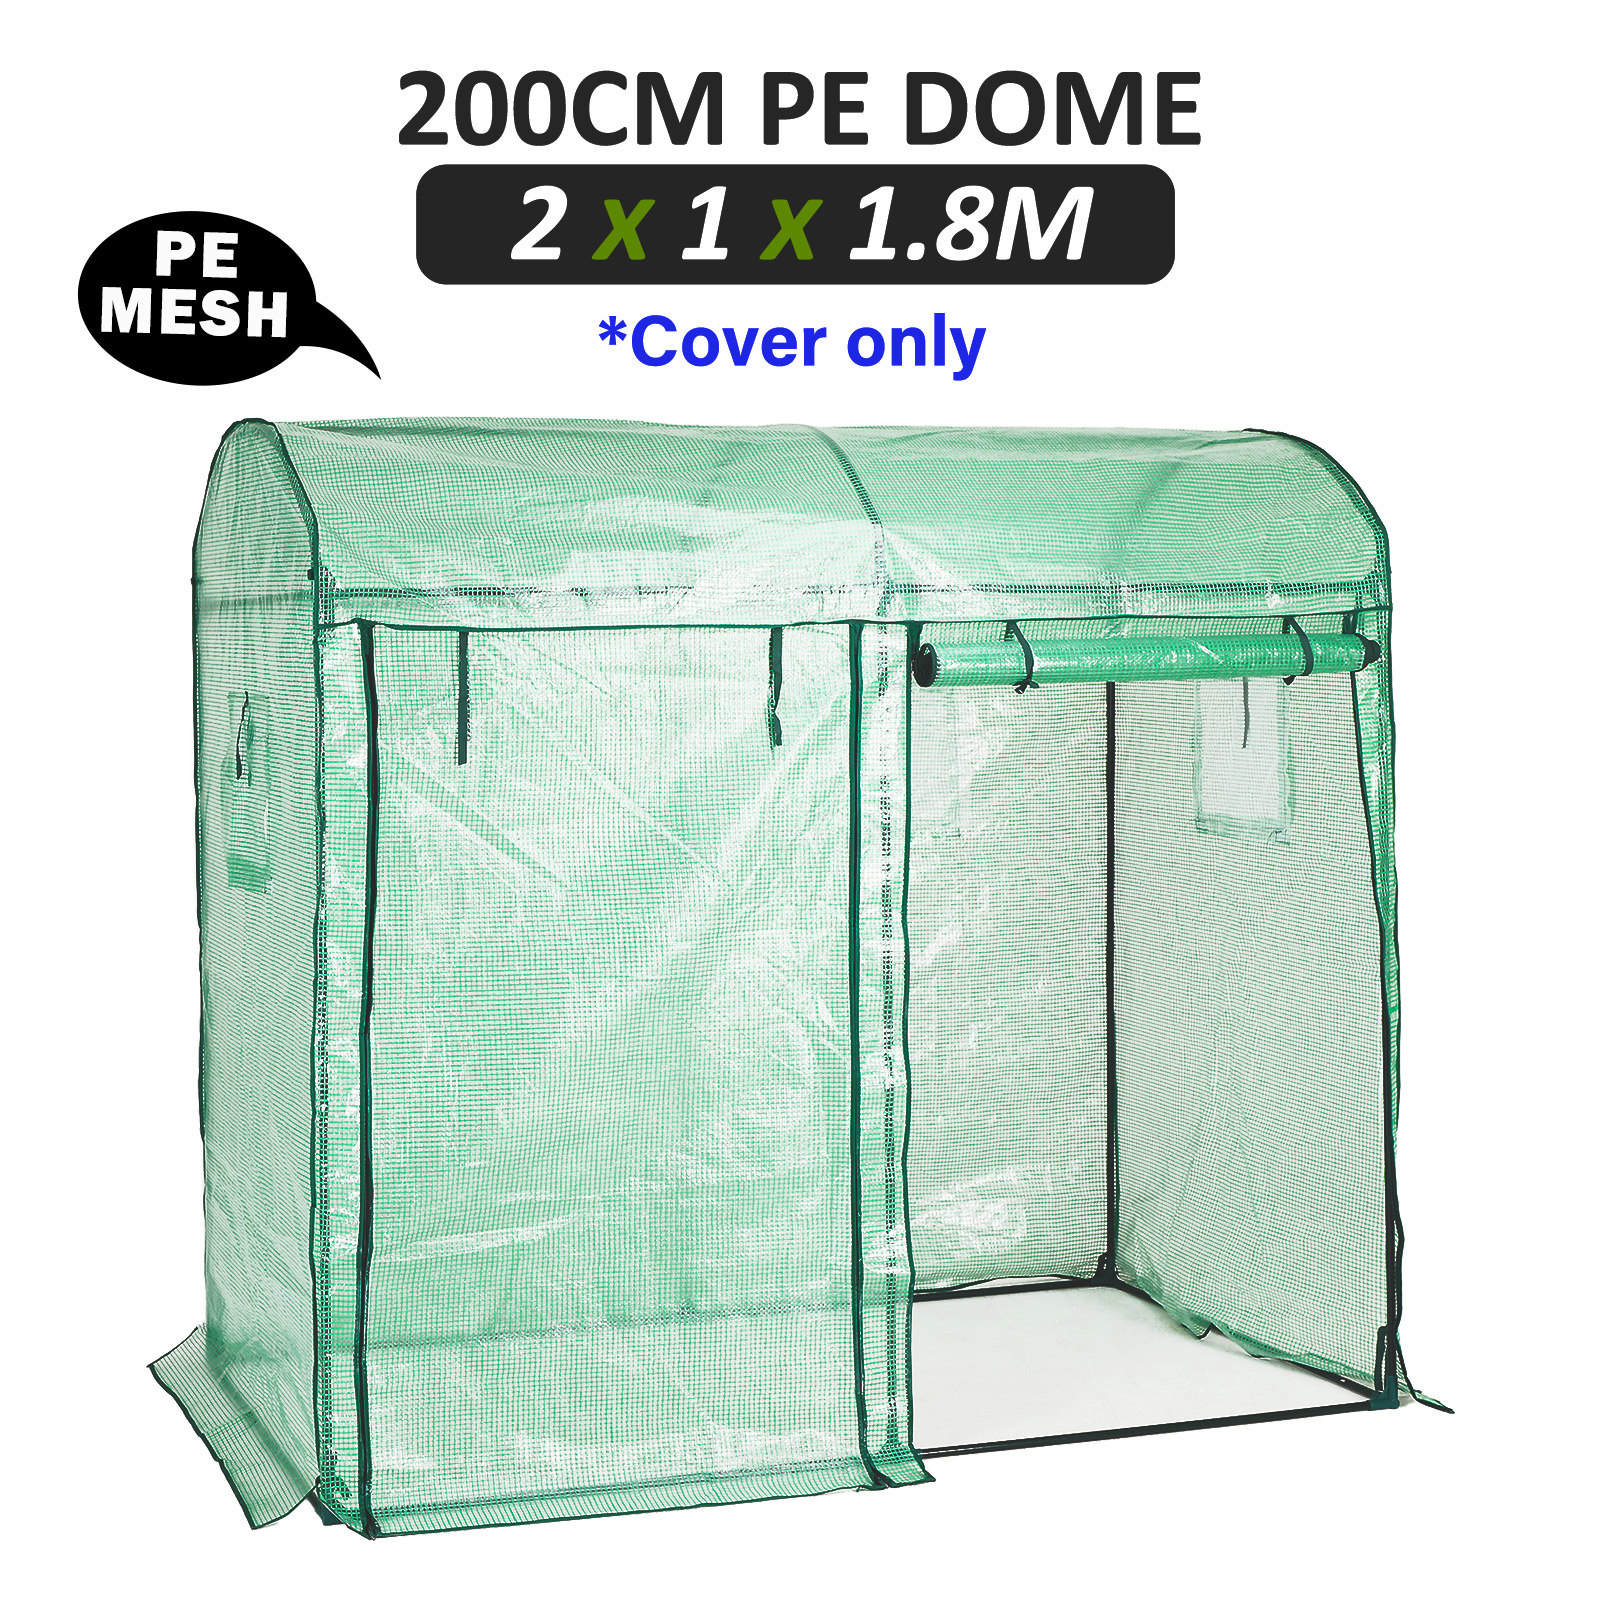 200cm Greenhouse PE Dome Roof Cover Only - GREEN